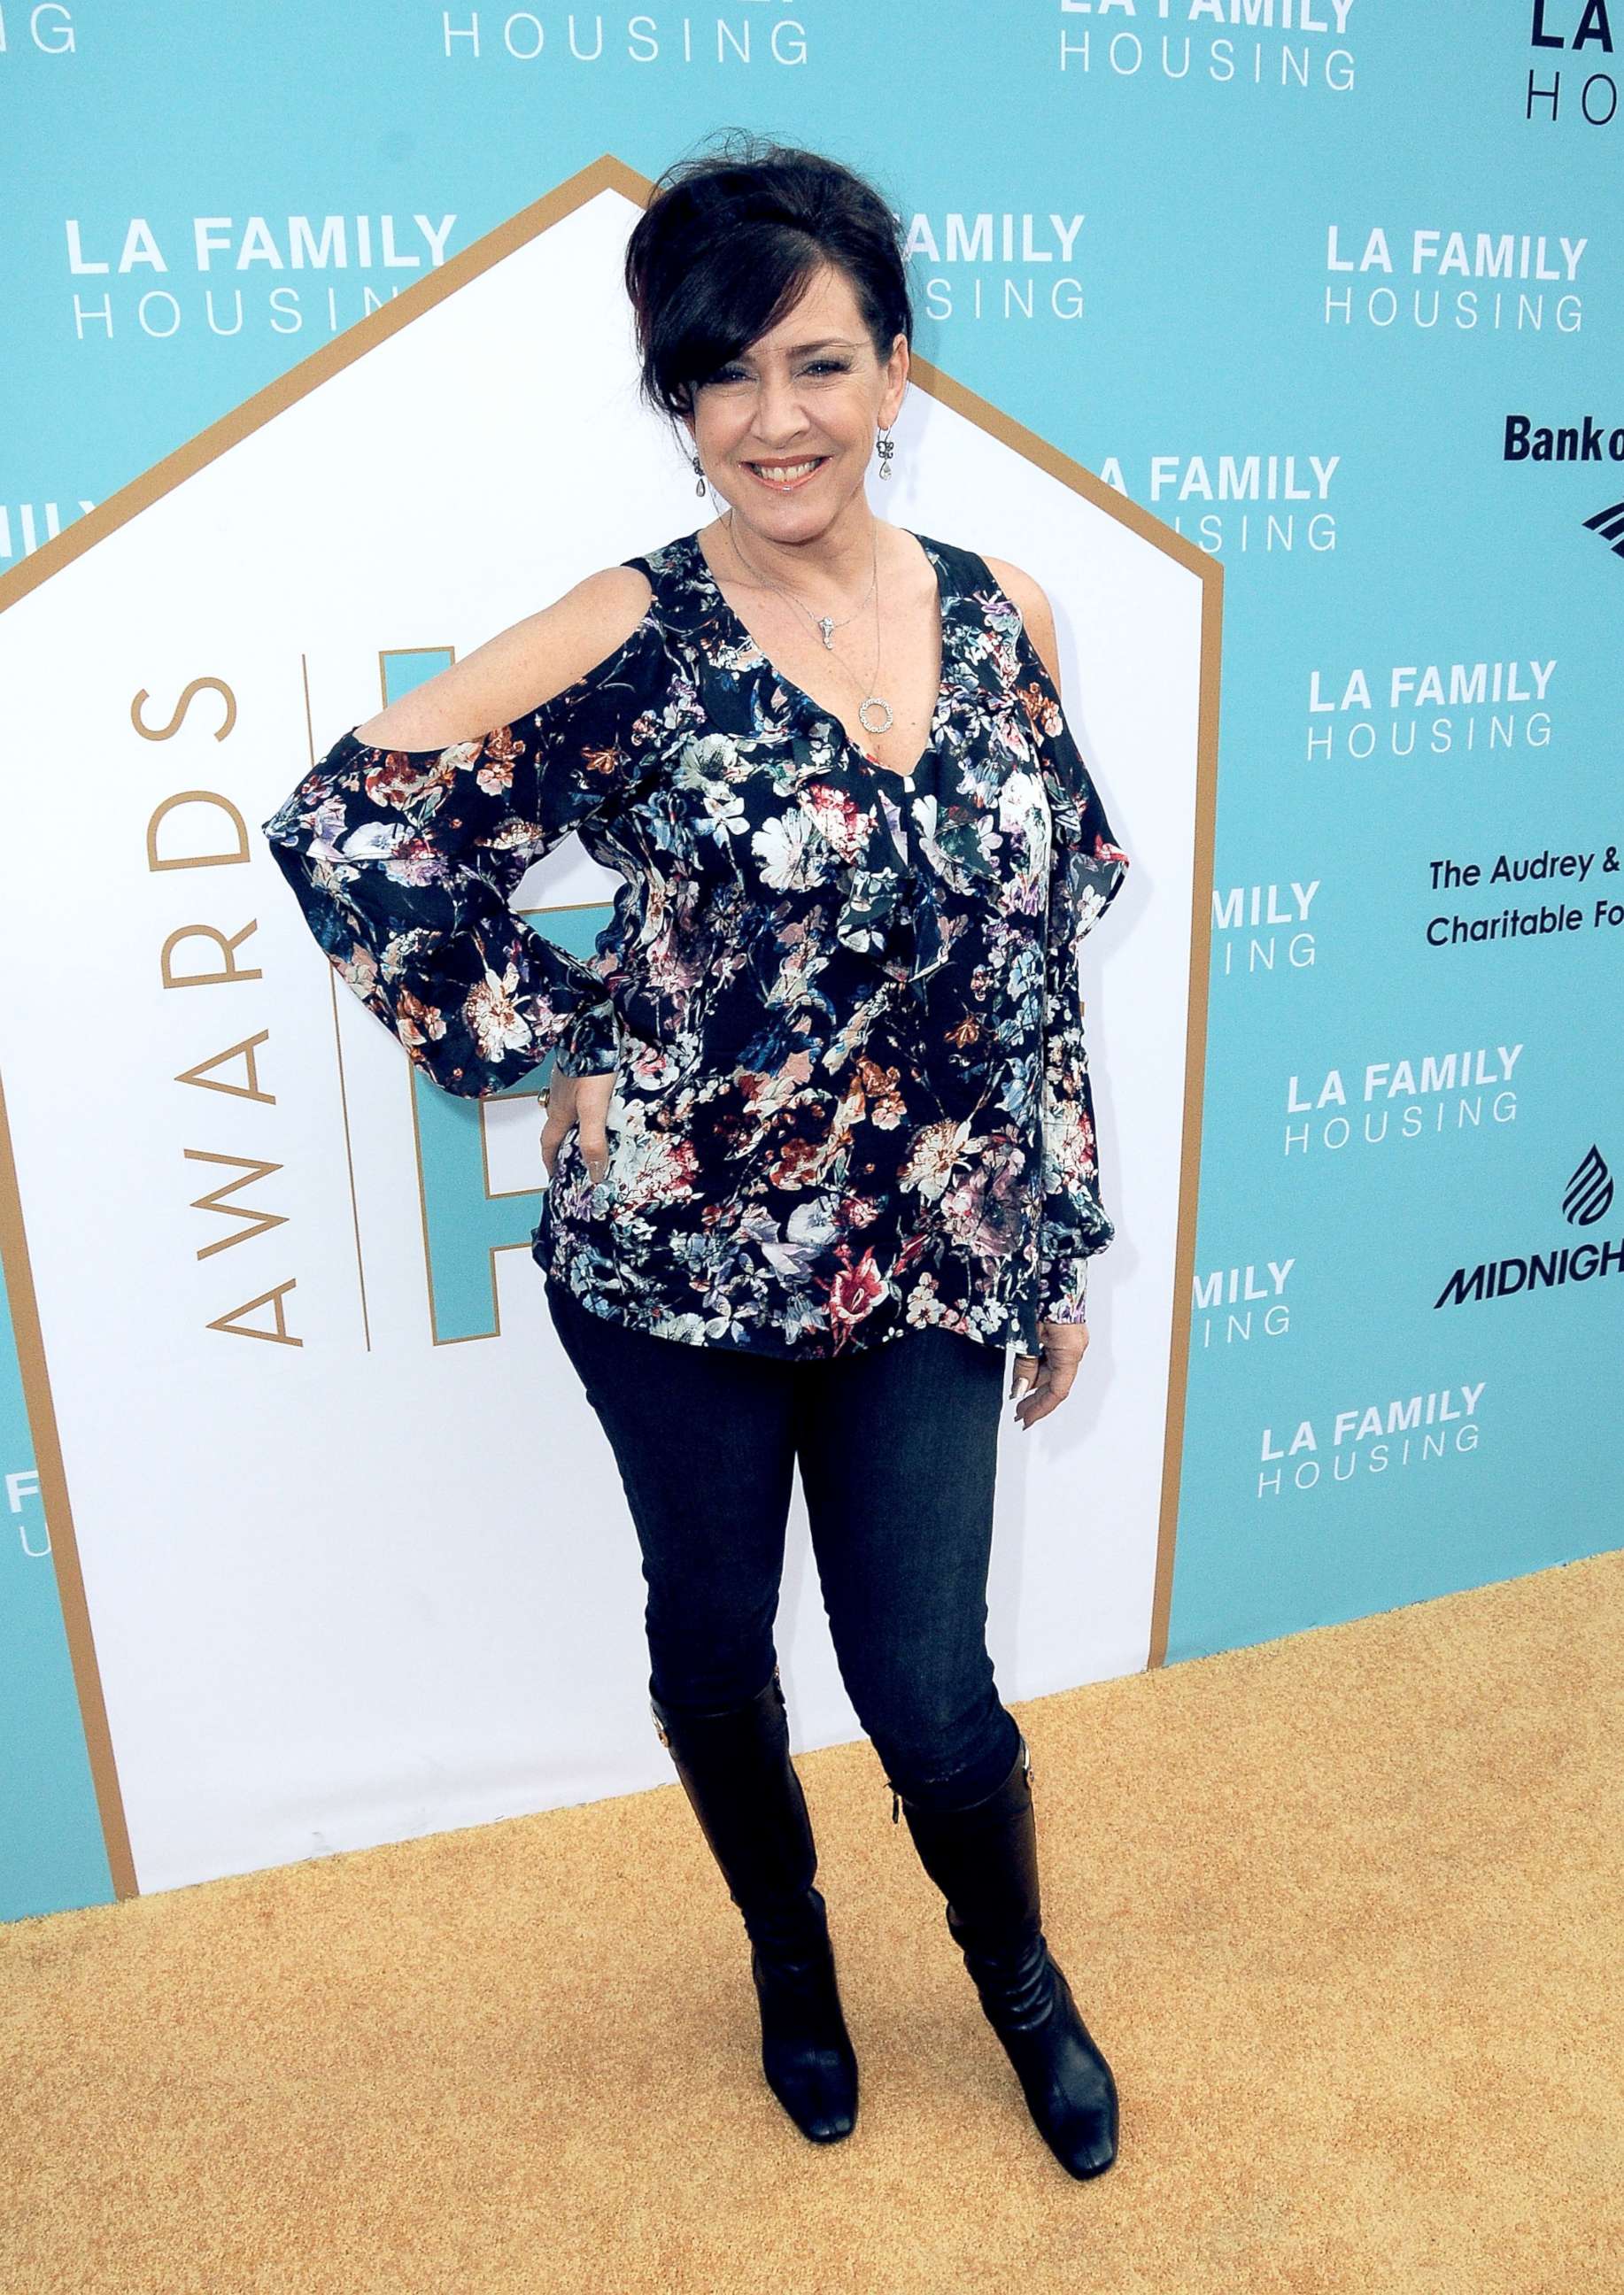 PHOTO: Actress Joely Fisher attends LA Family Housing 2017 awards at The Lot, April 27, 2017 in West Hollywood.